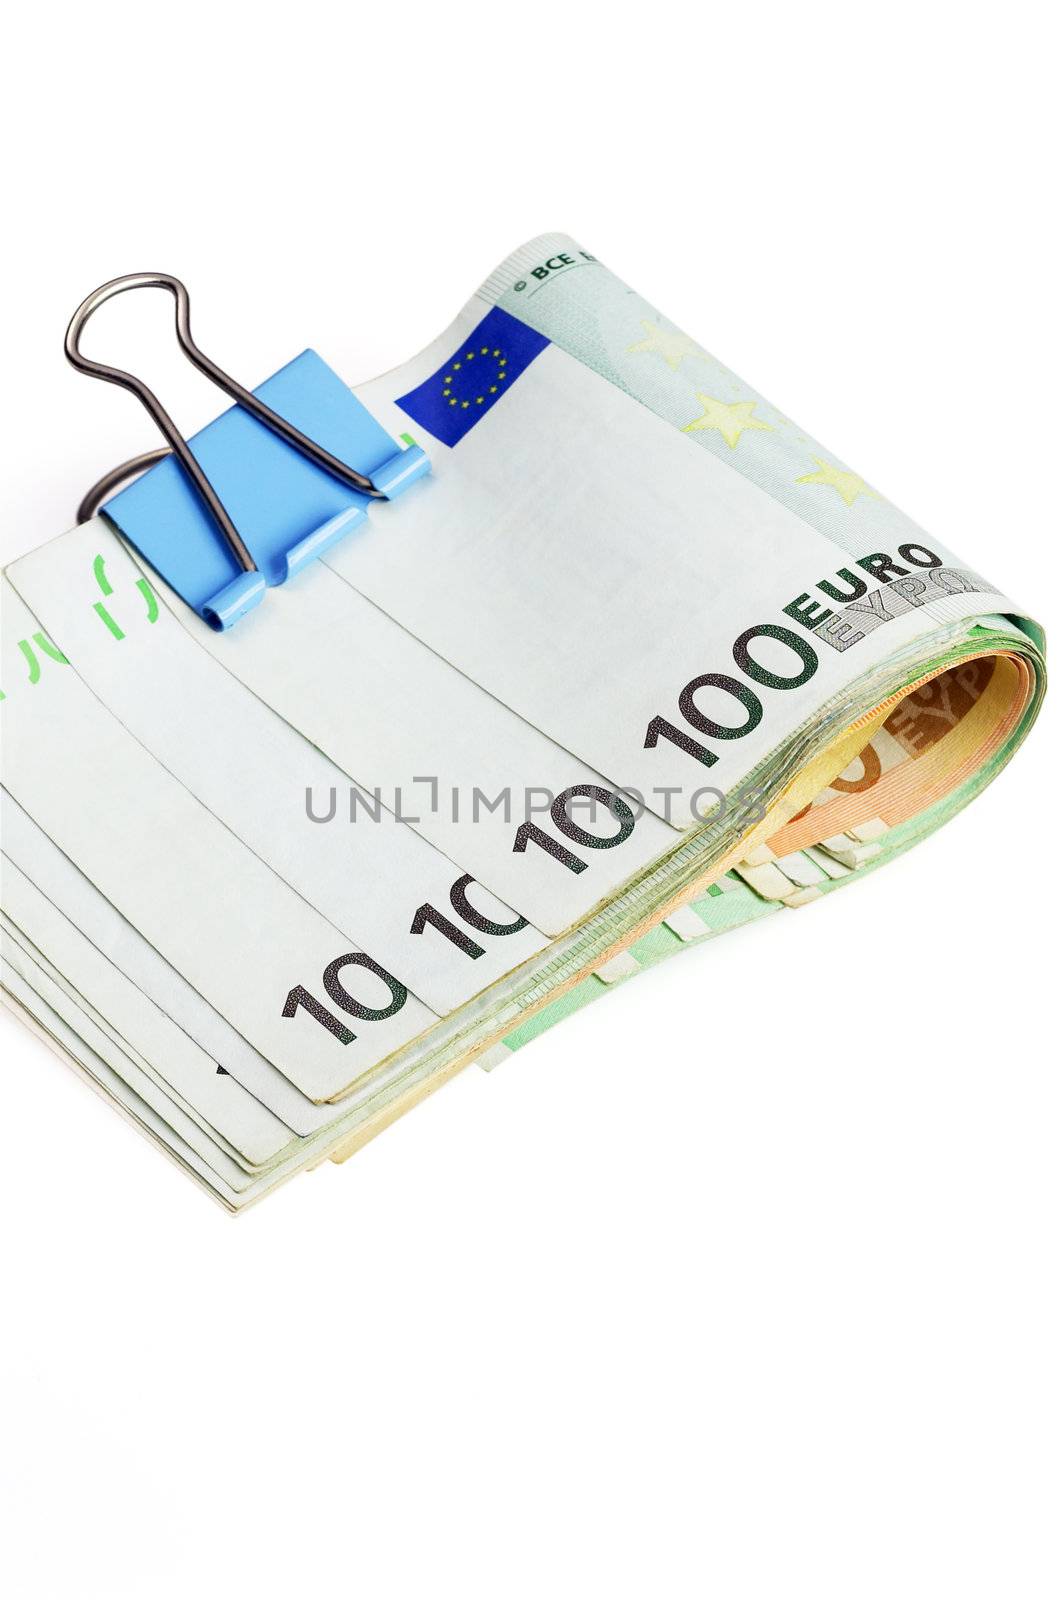 euro bills on a clip isolated on white background